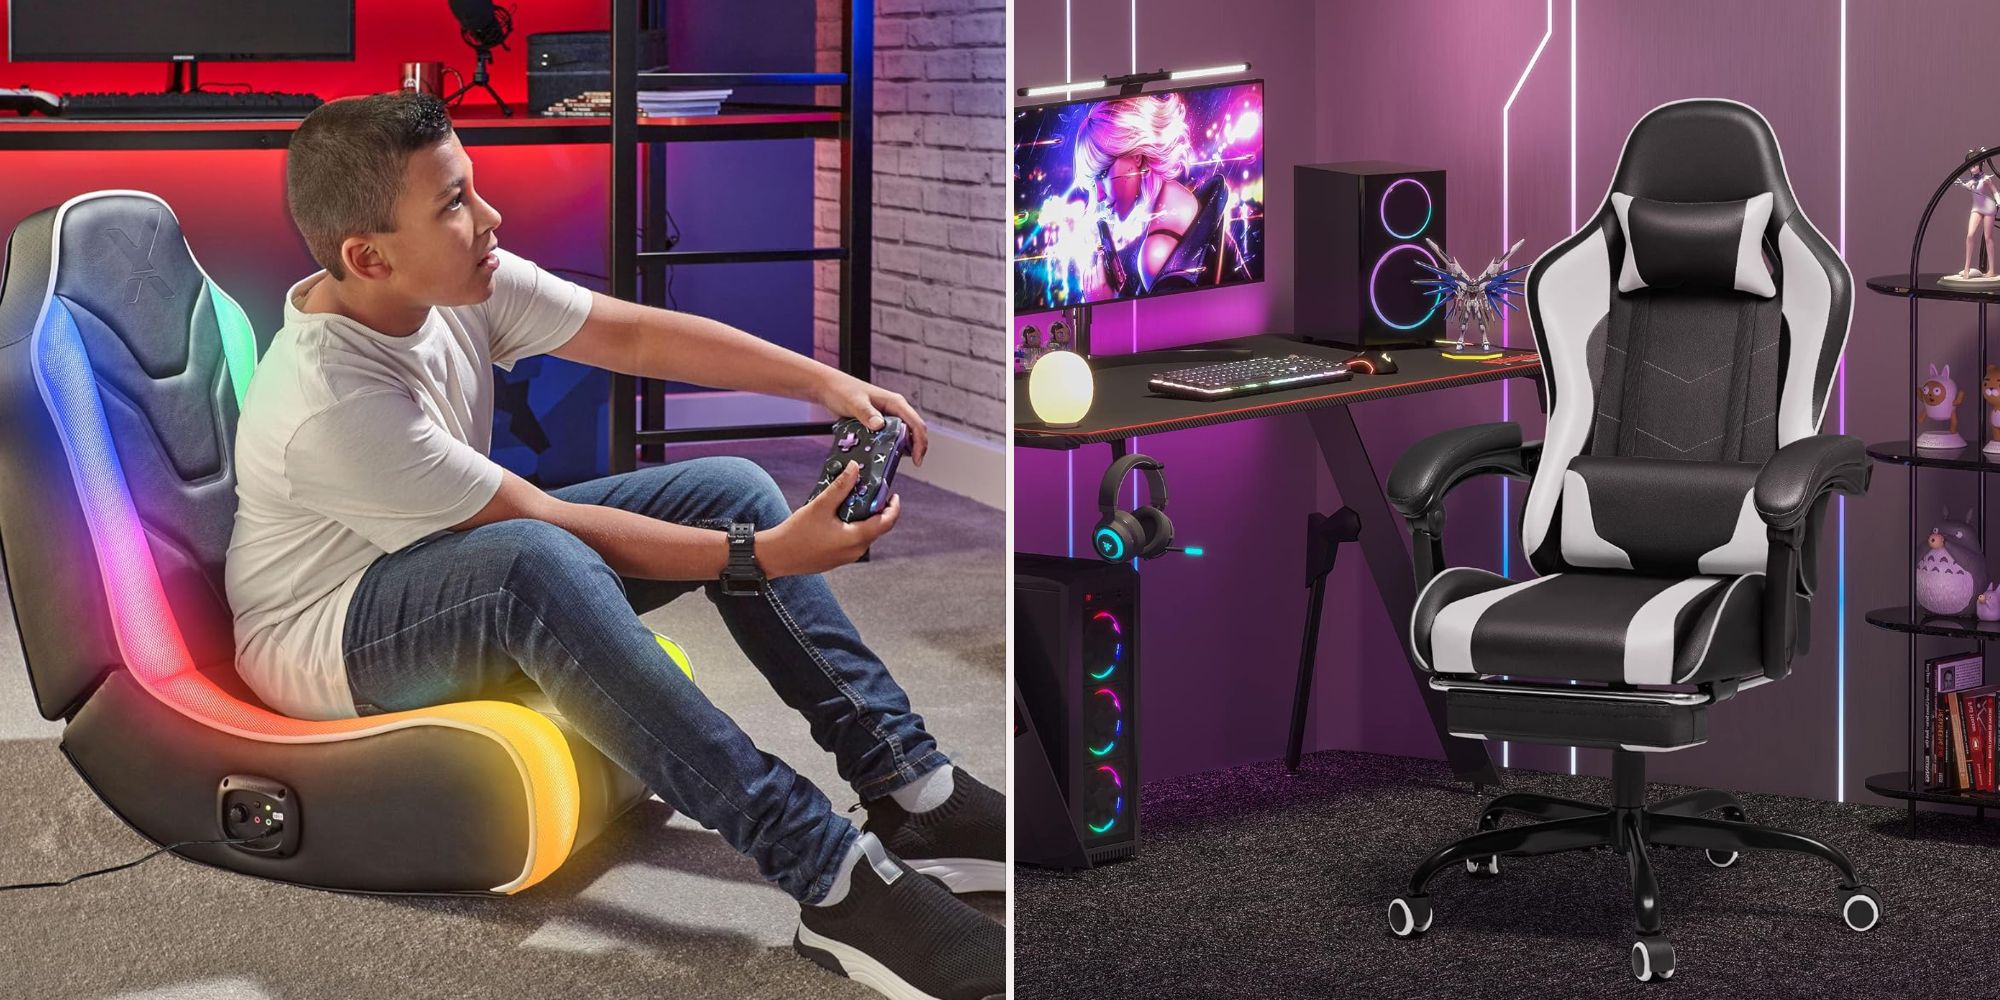 Xrocker and homel chair images side by side